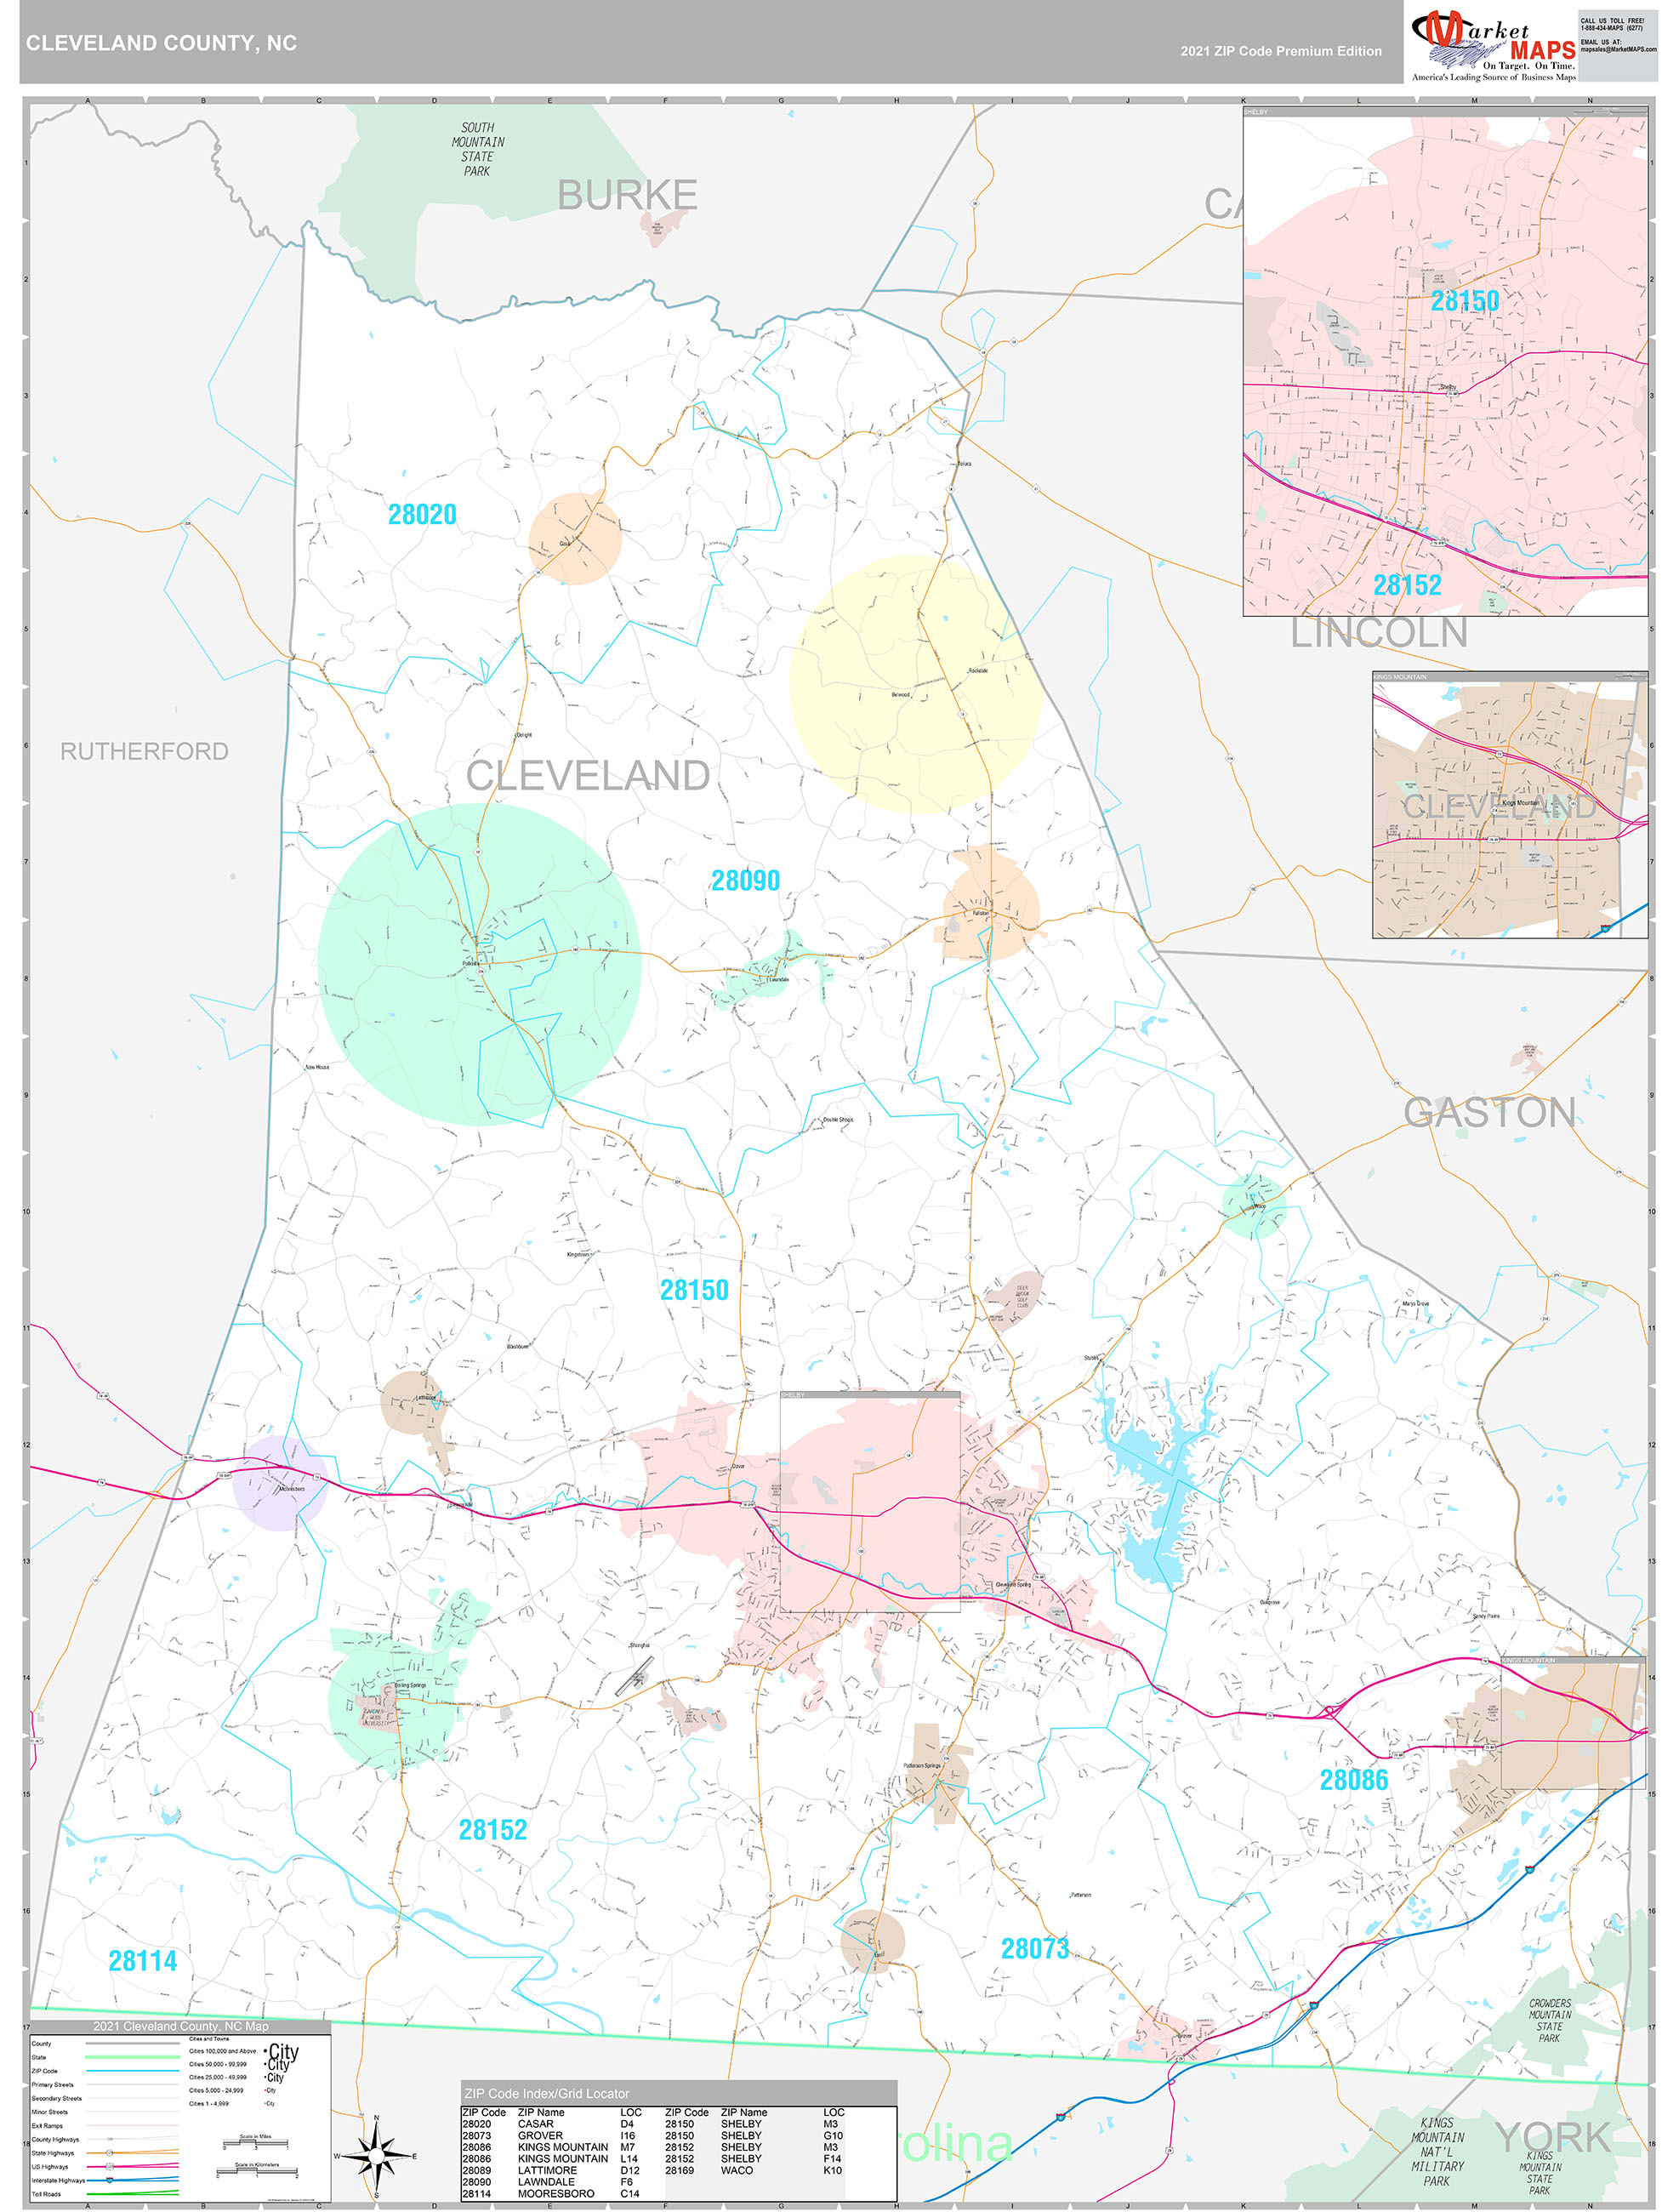 Cleveland County NC Wall Map Premium Style by MarketMAPS MapSales